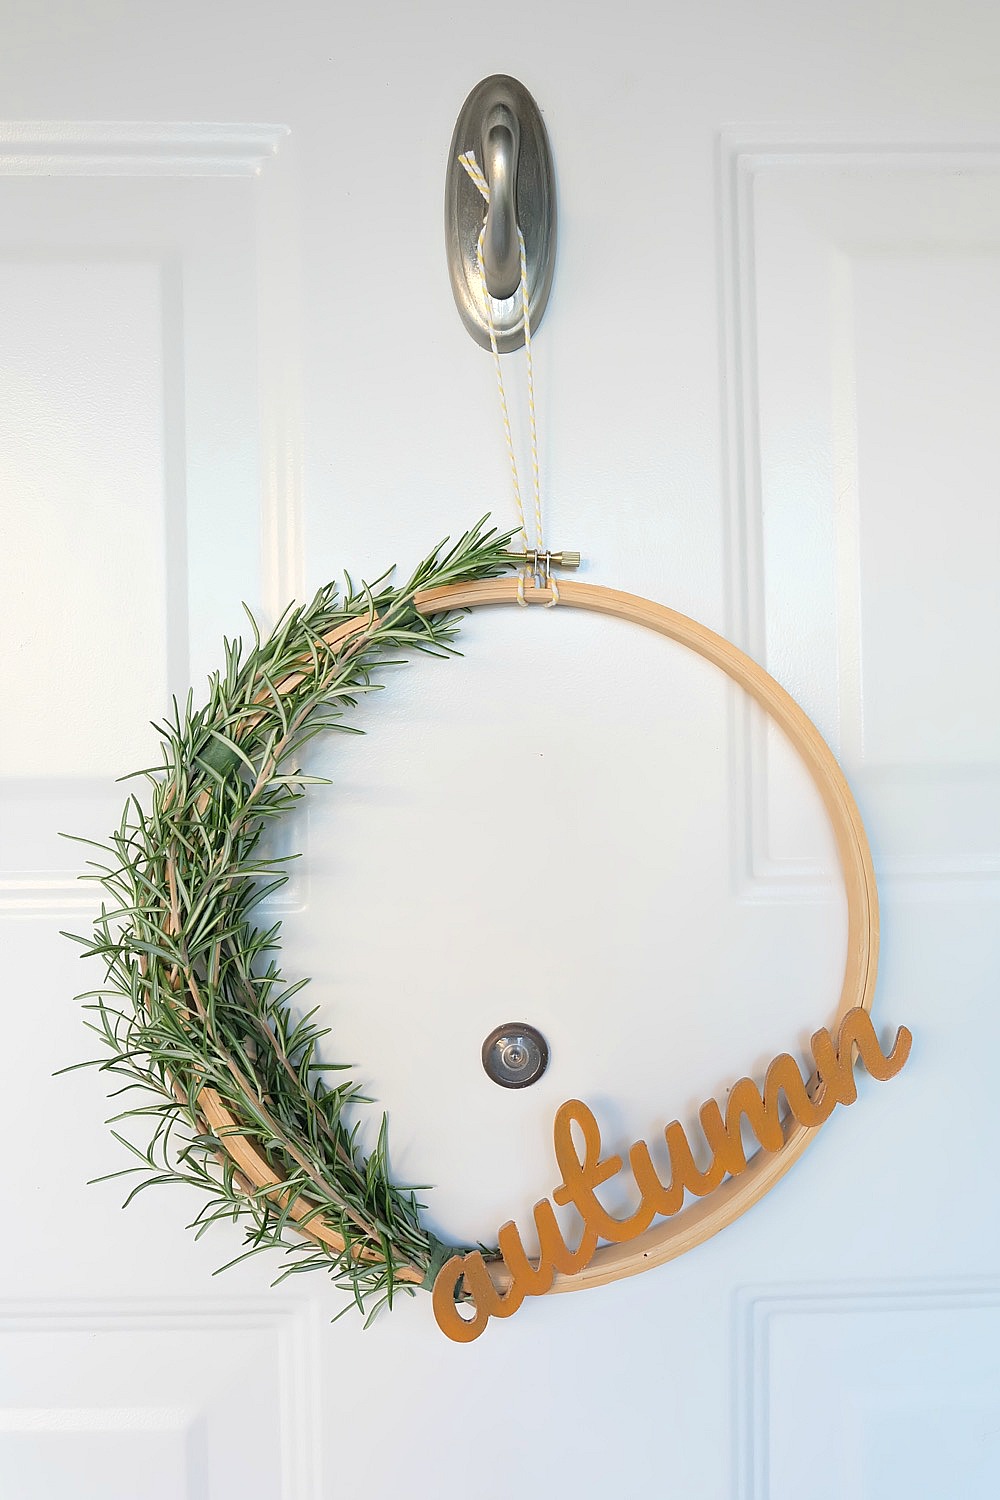 Create a simple DIY Rosemary Autumn Wreath to celebrate fall with our free Autumn SVG file and wreath tutorial. This project uses fresh rosemary from your garden, an embroidery hoop and a design cut from chipboard using your Cricut Maker. #Autumn #wreath #CricutMaker #Cricut